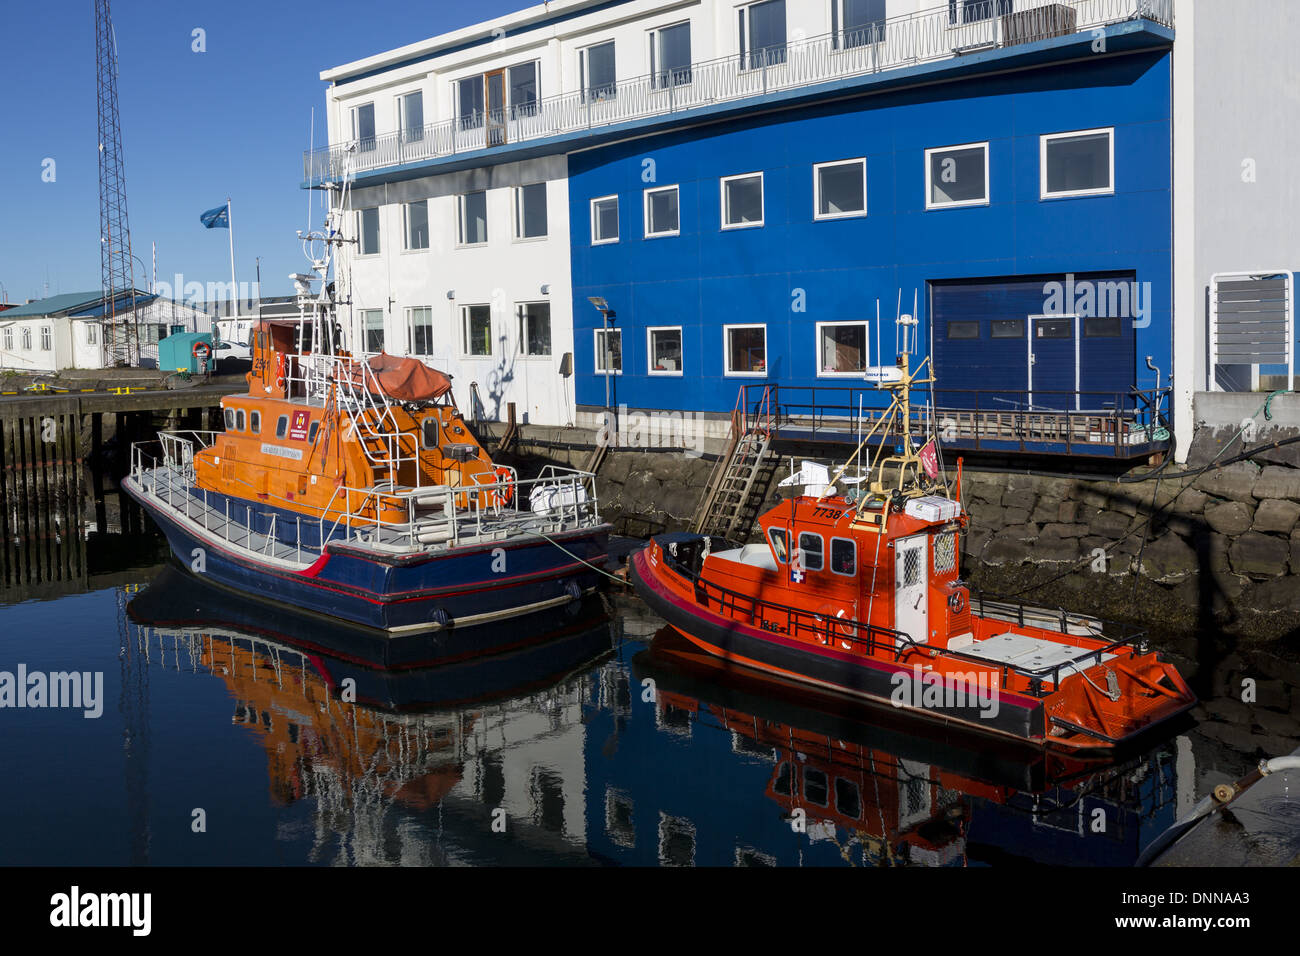 Vessels of the Icelandic Search and Rescue service moored at their base in Reyjavik, Iceland Stock Photo